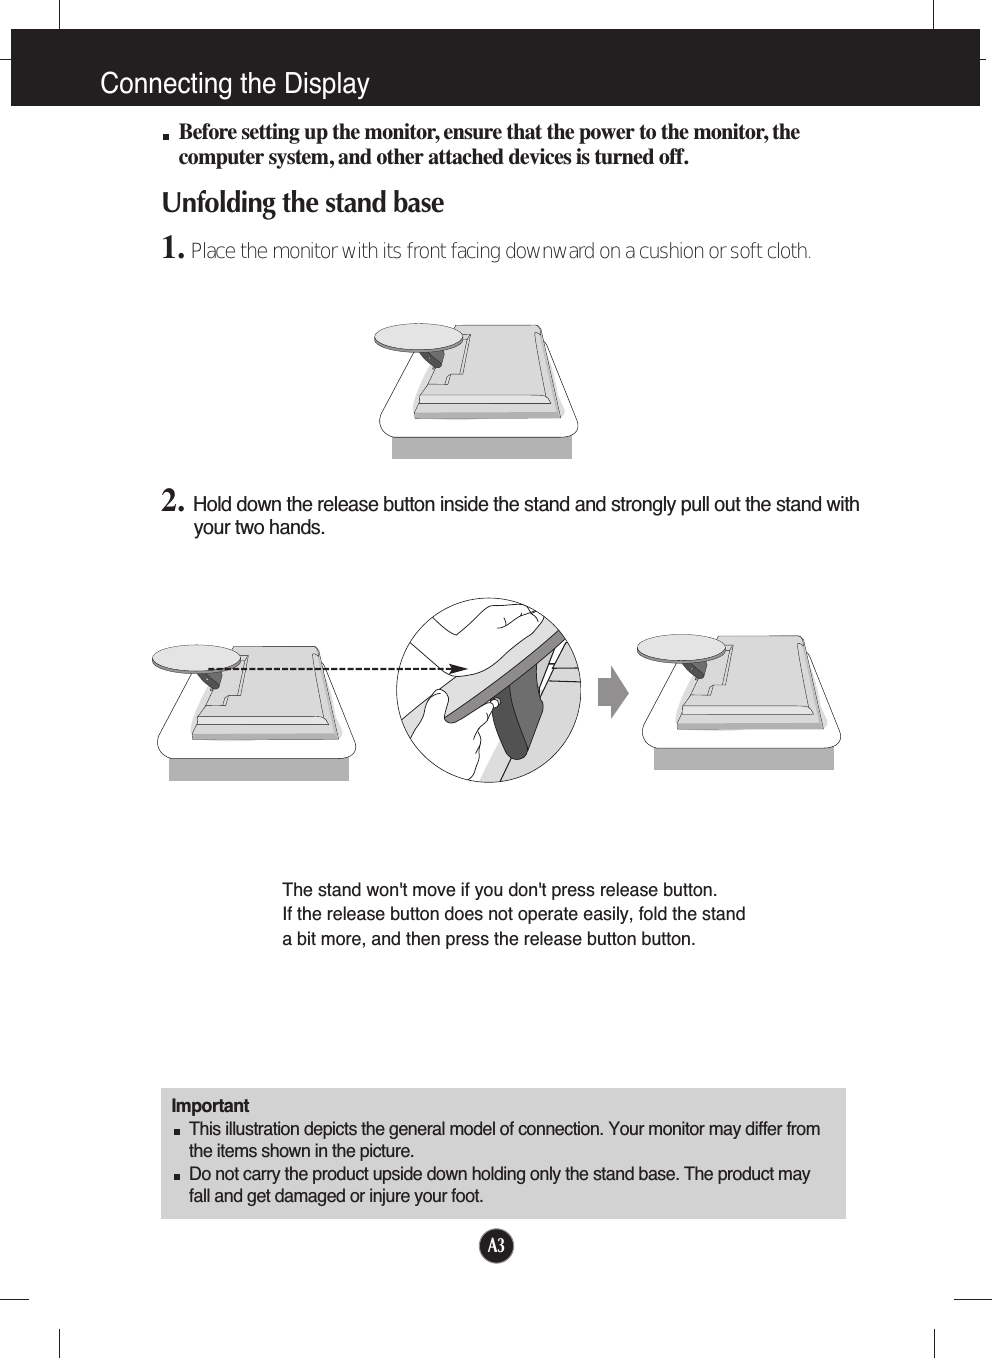 A3Connecting the DisplayBefore setting up the monitor, ensure that the power to the monitor, thecomputer system, and other attached devices is turned off. Unfolding the stand base 1. Place the monitor with its front facing downward on a cushion or soft cloth.ImportantThis illustration depicts the general model of connection. Your monitor may differ fromthe items shown in the picture.Do not carry the product upside down holding only the stand base. The product mayfall and get damaged or injure your foot.2. Hold down the release button inside the stand and strongly pull out the stand withyour two hands.The stand won&apos;t move if you don&apos;t press release button.If the release button does not operate easily, fold the stand a bit more, and then press the release button button.